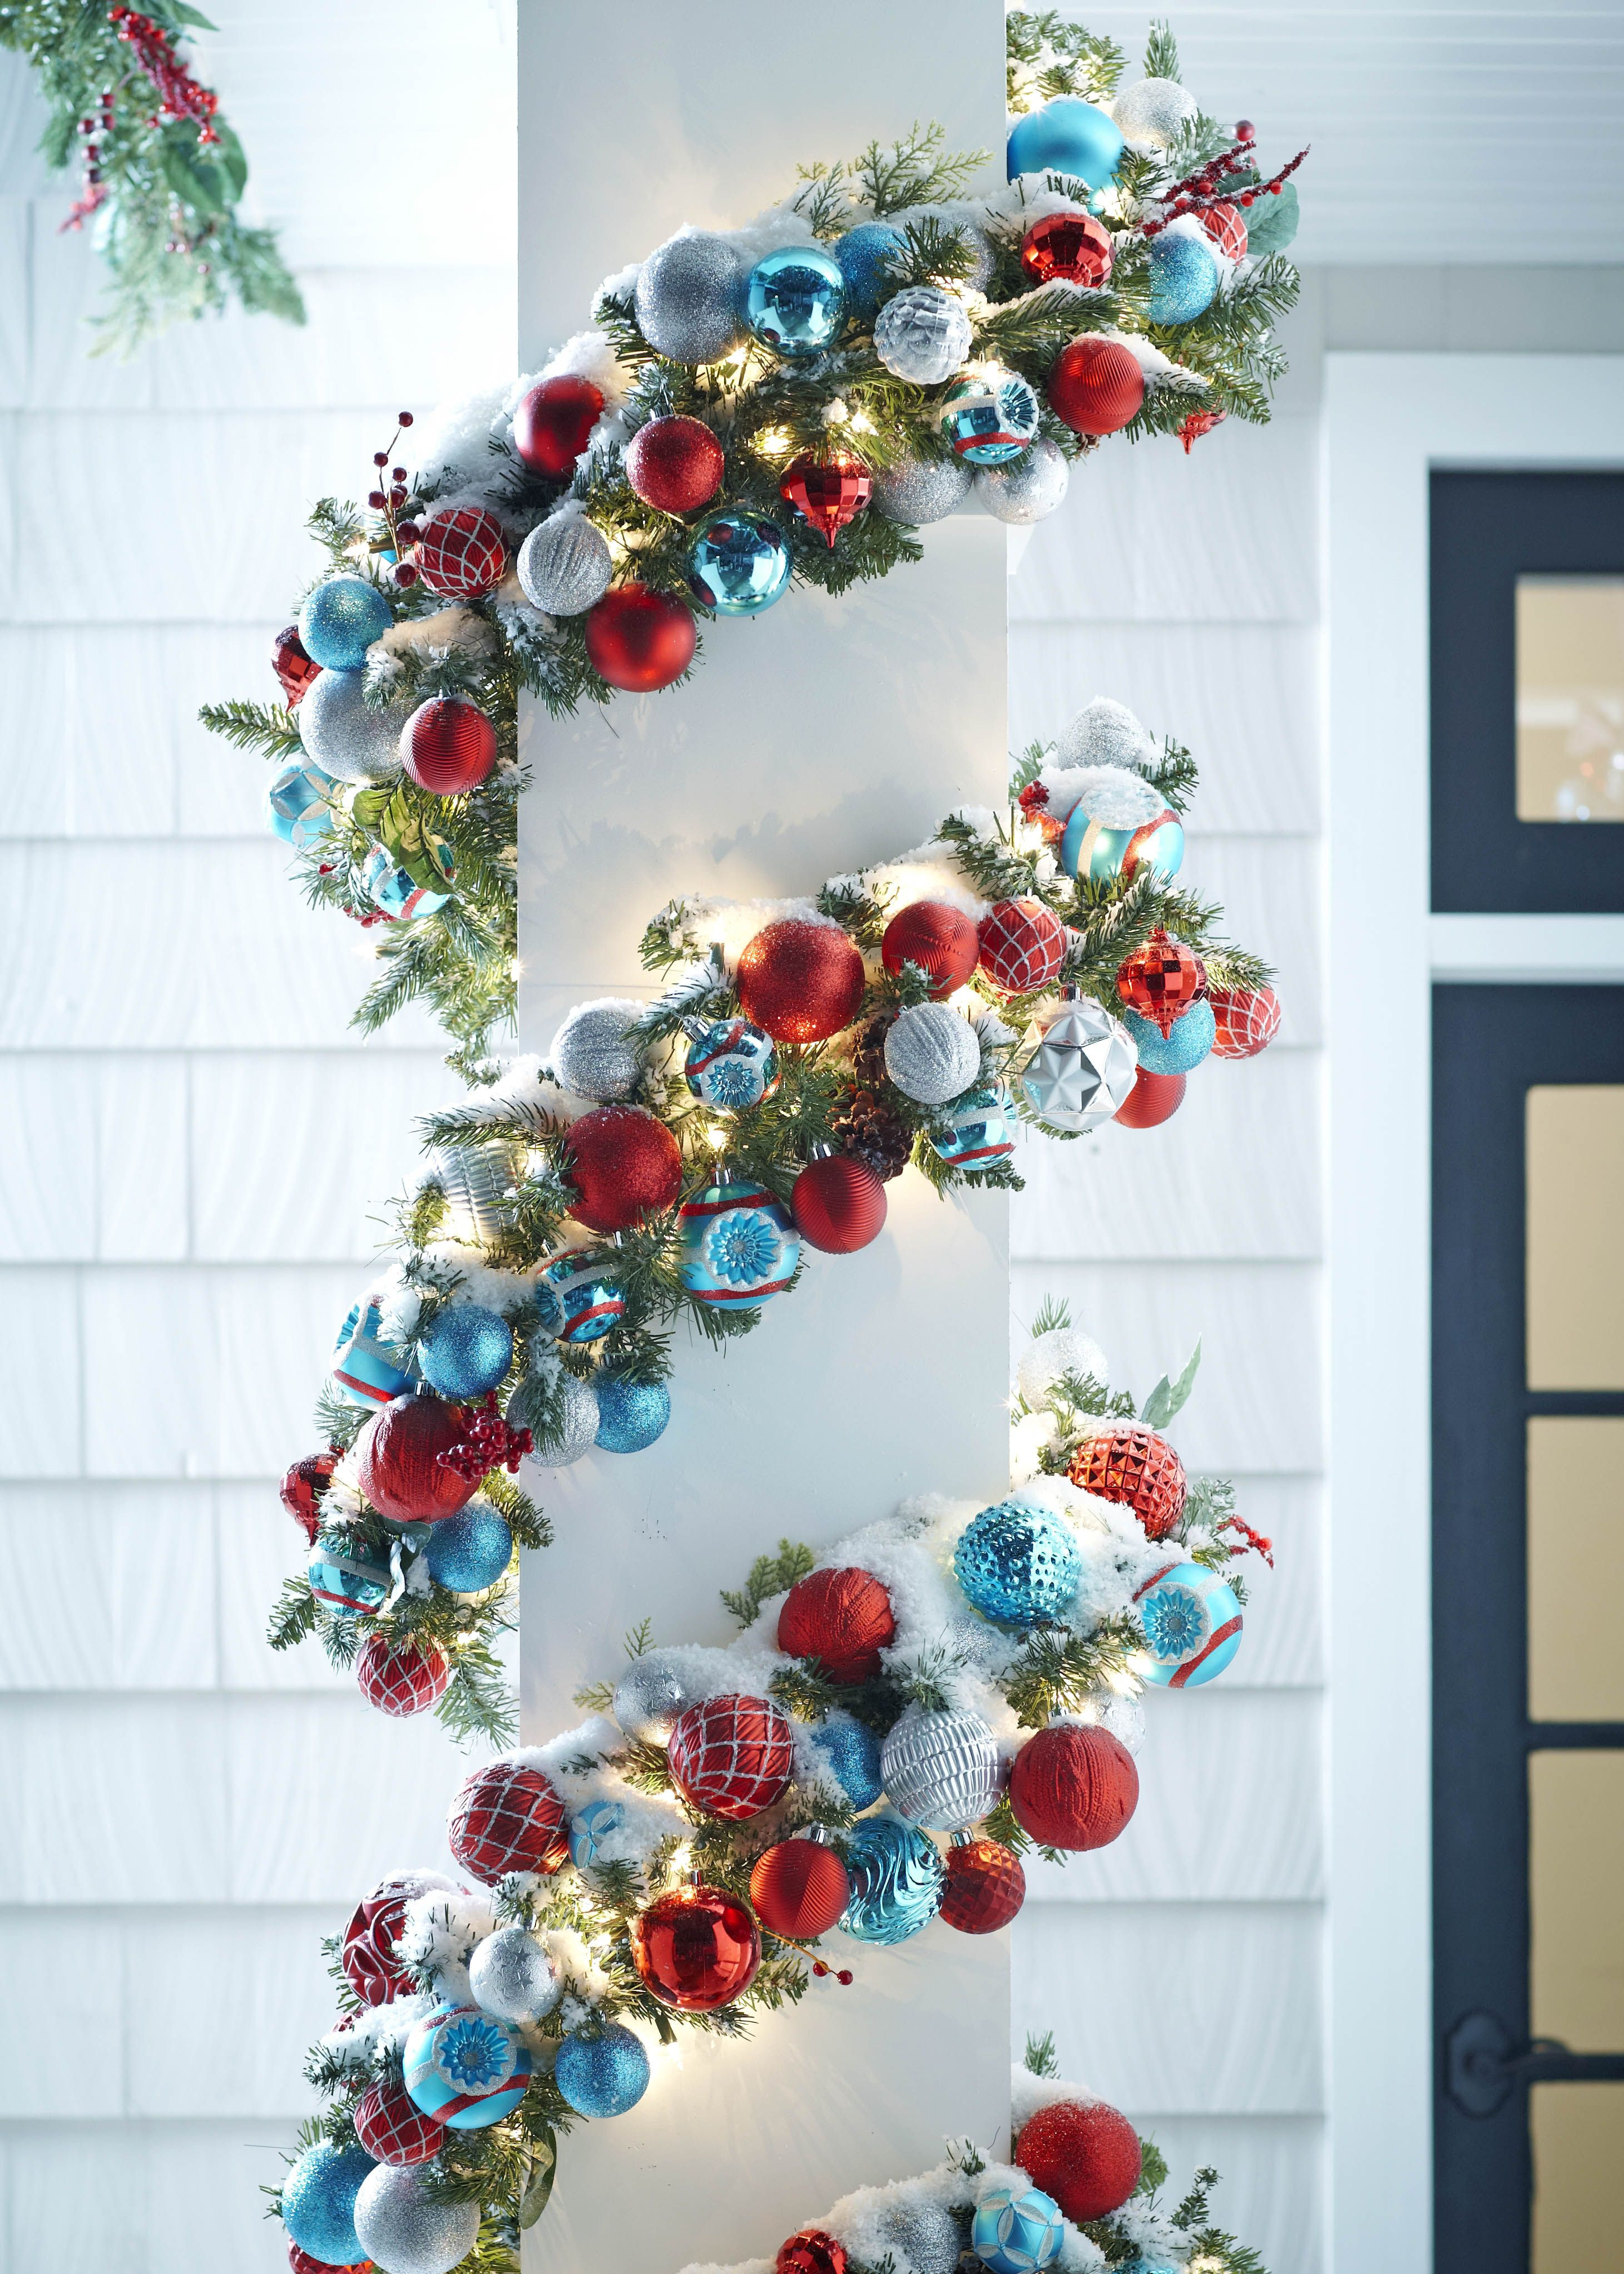 DIY Christmas Garland Ideas
 Add shatterproof ornaments with wire to pre lit garland